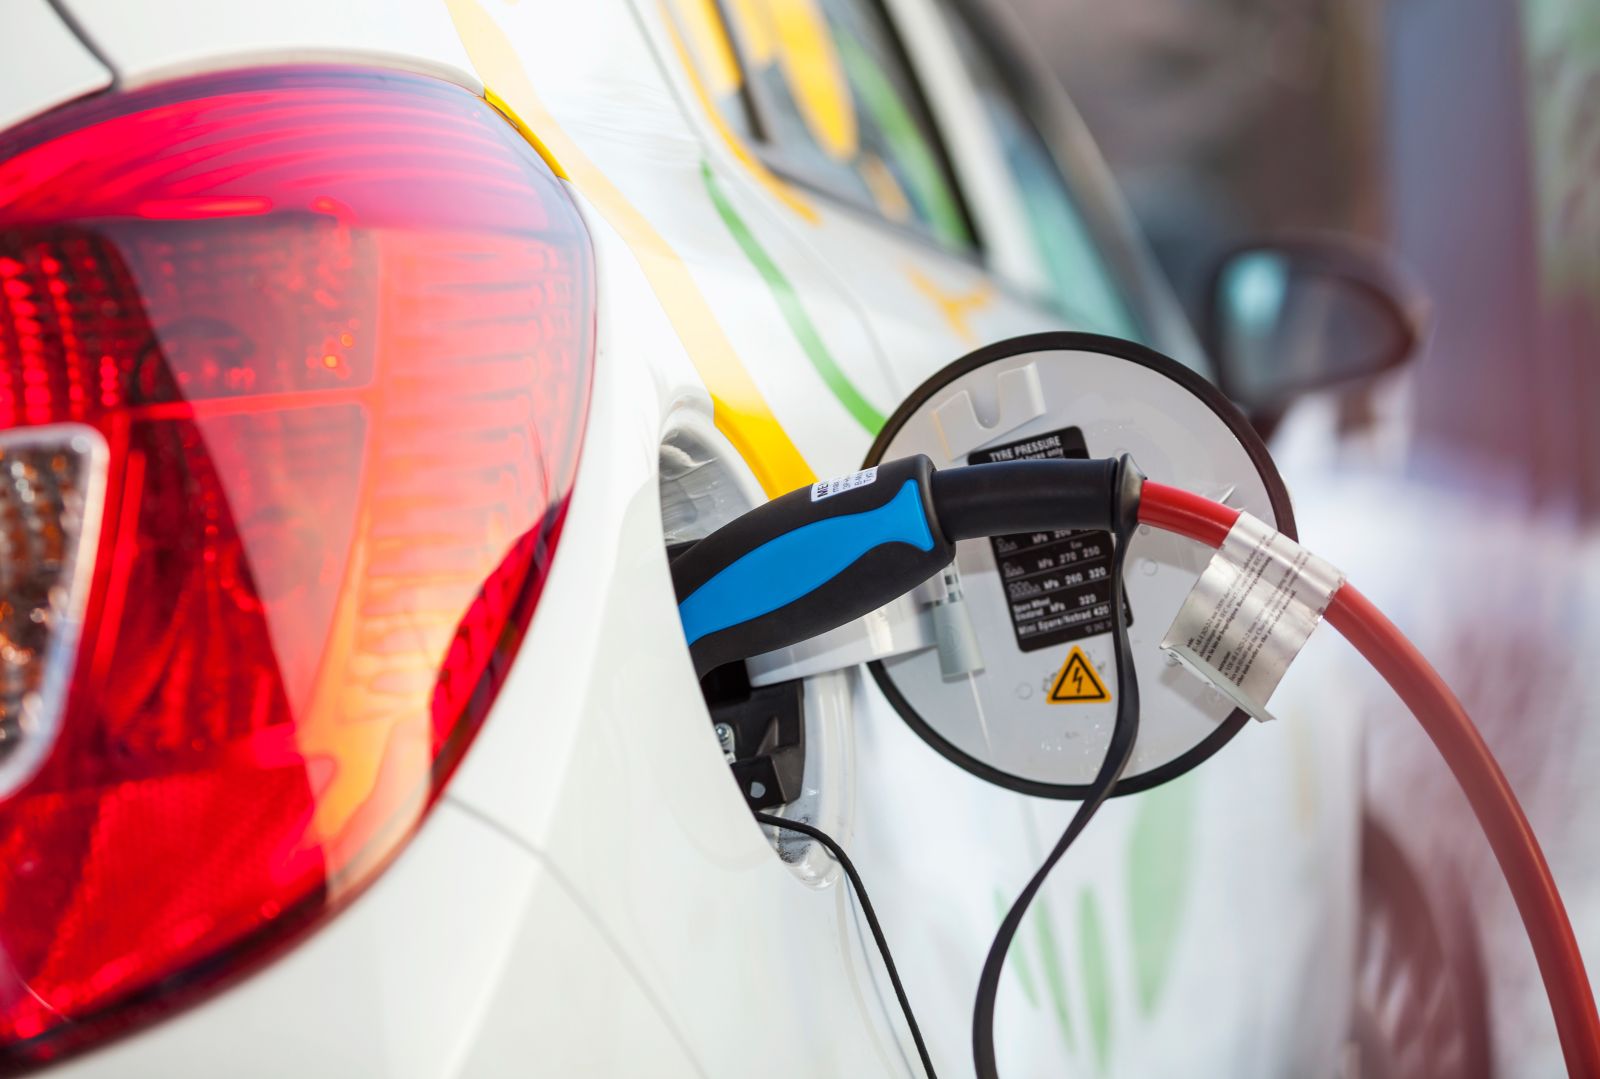 Charging an electric car: it will take a transformation of transport worldwide to meet climate targets.